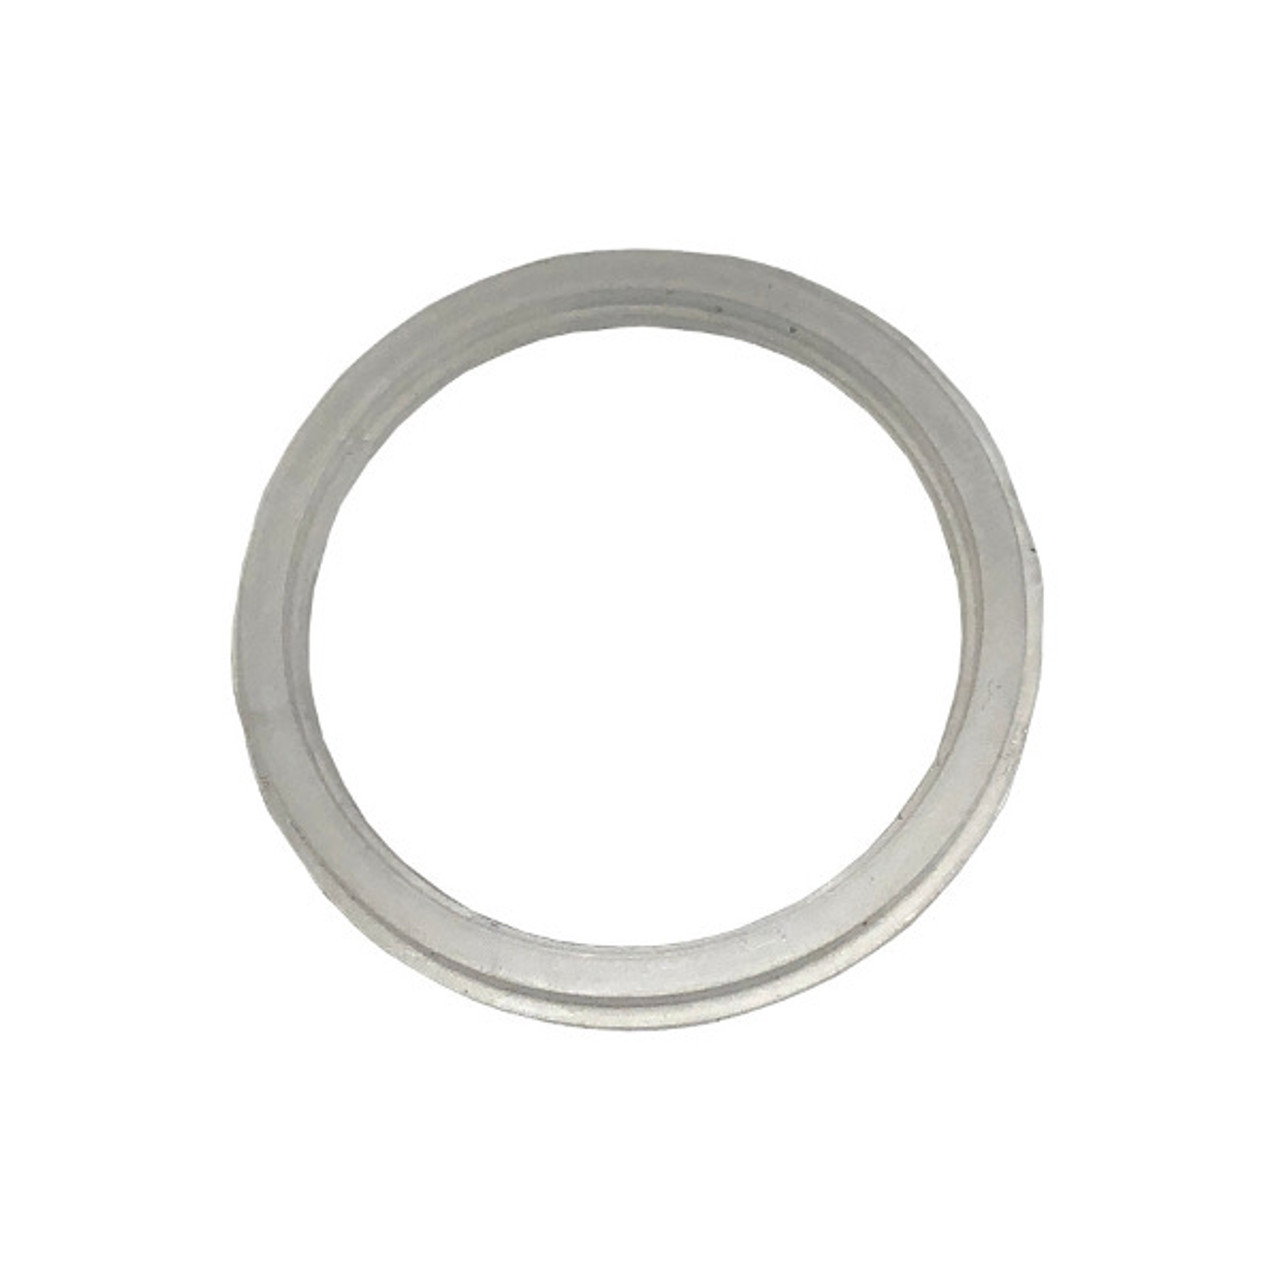 Waterjet Cutting Machine Head Parts Switch Valve Seal Ring Component  20428052 - China High Pressure Cutting Head, Waterjet Cutting Head Switch  Valve | Made-in-China.com